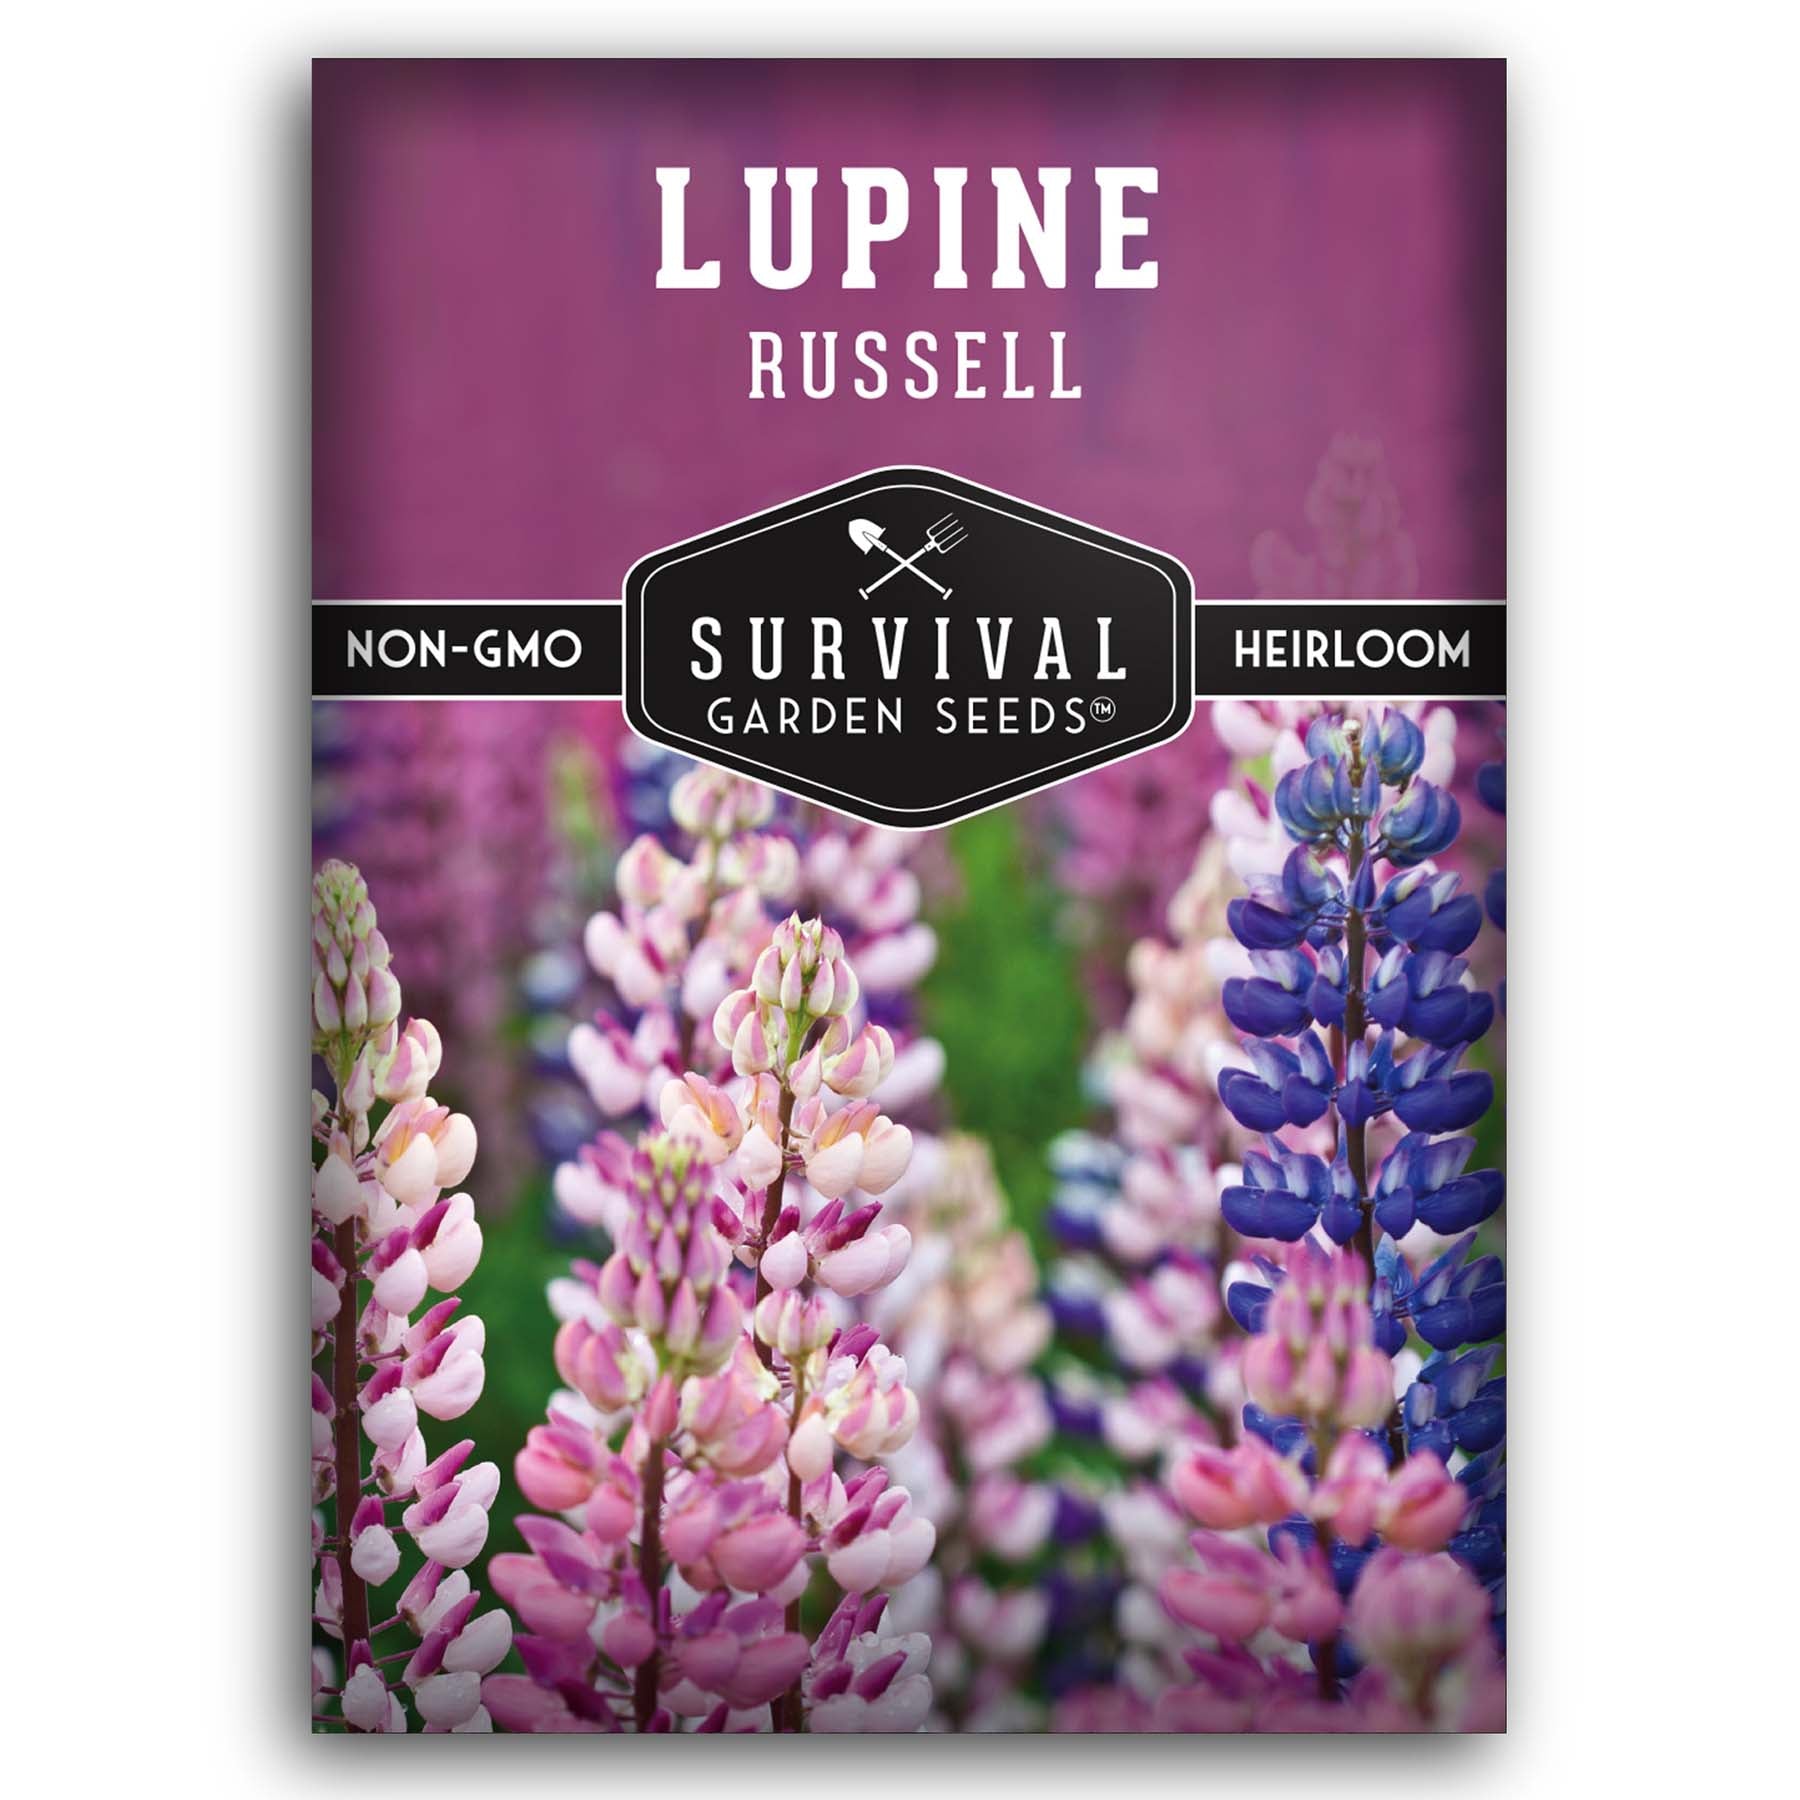 Russell Lupine flower seeds for planting